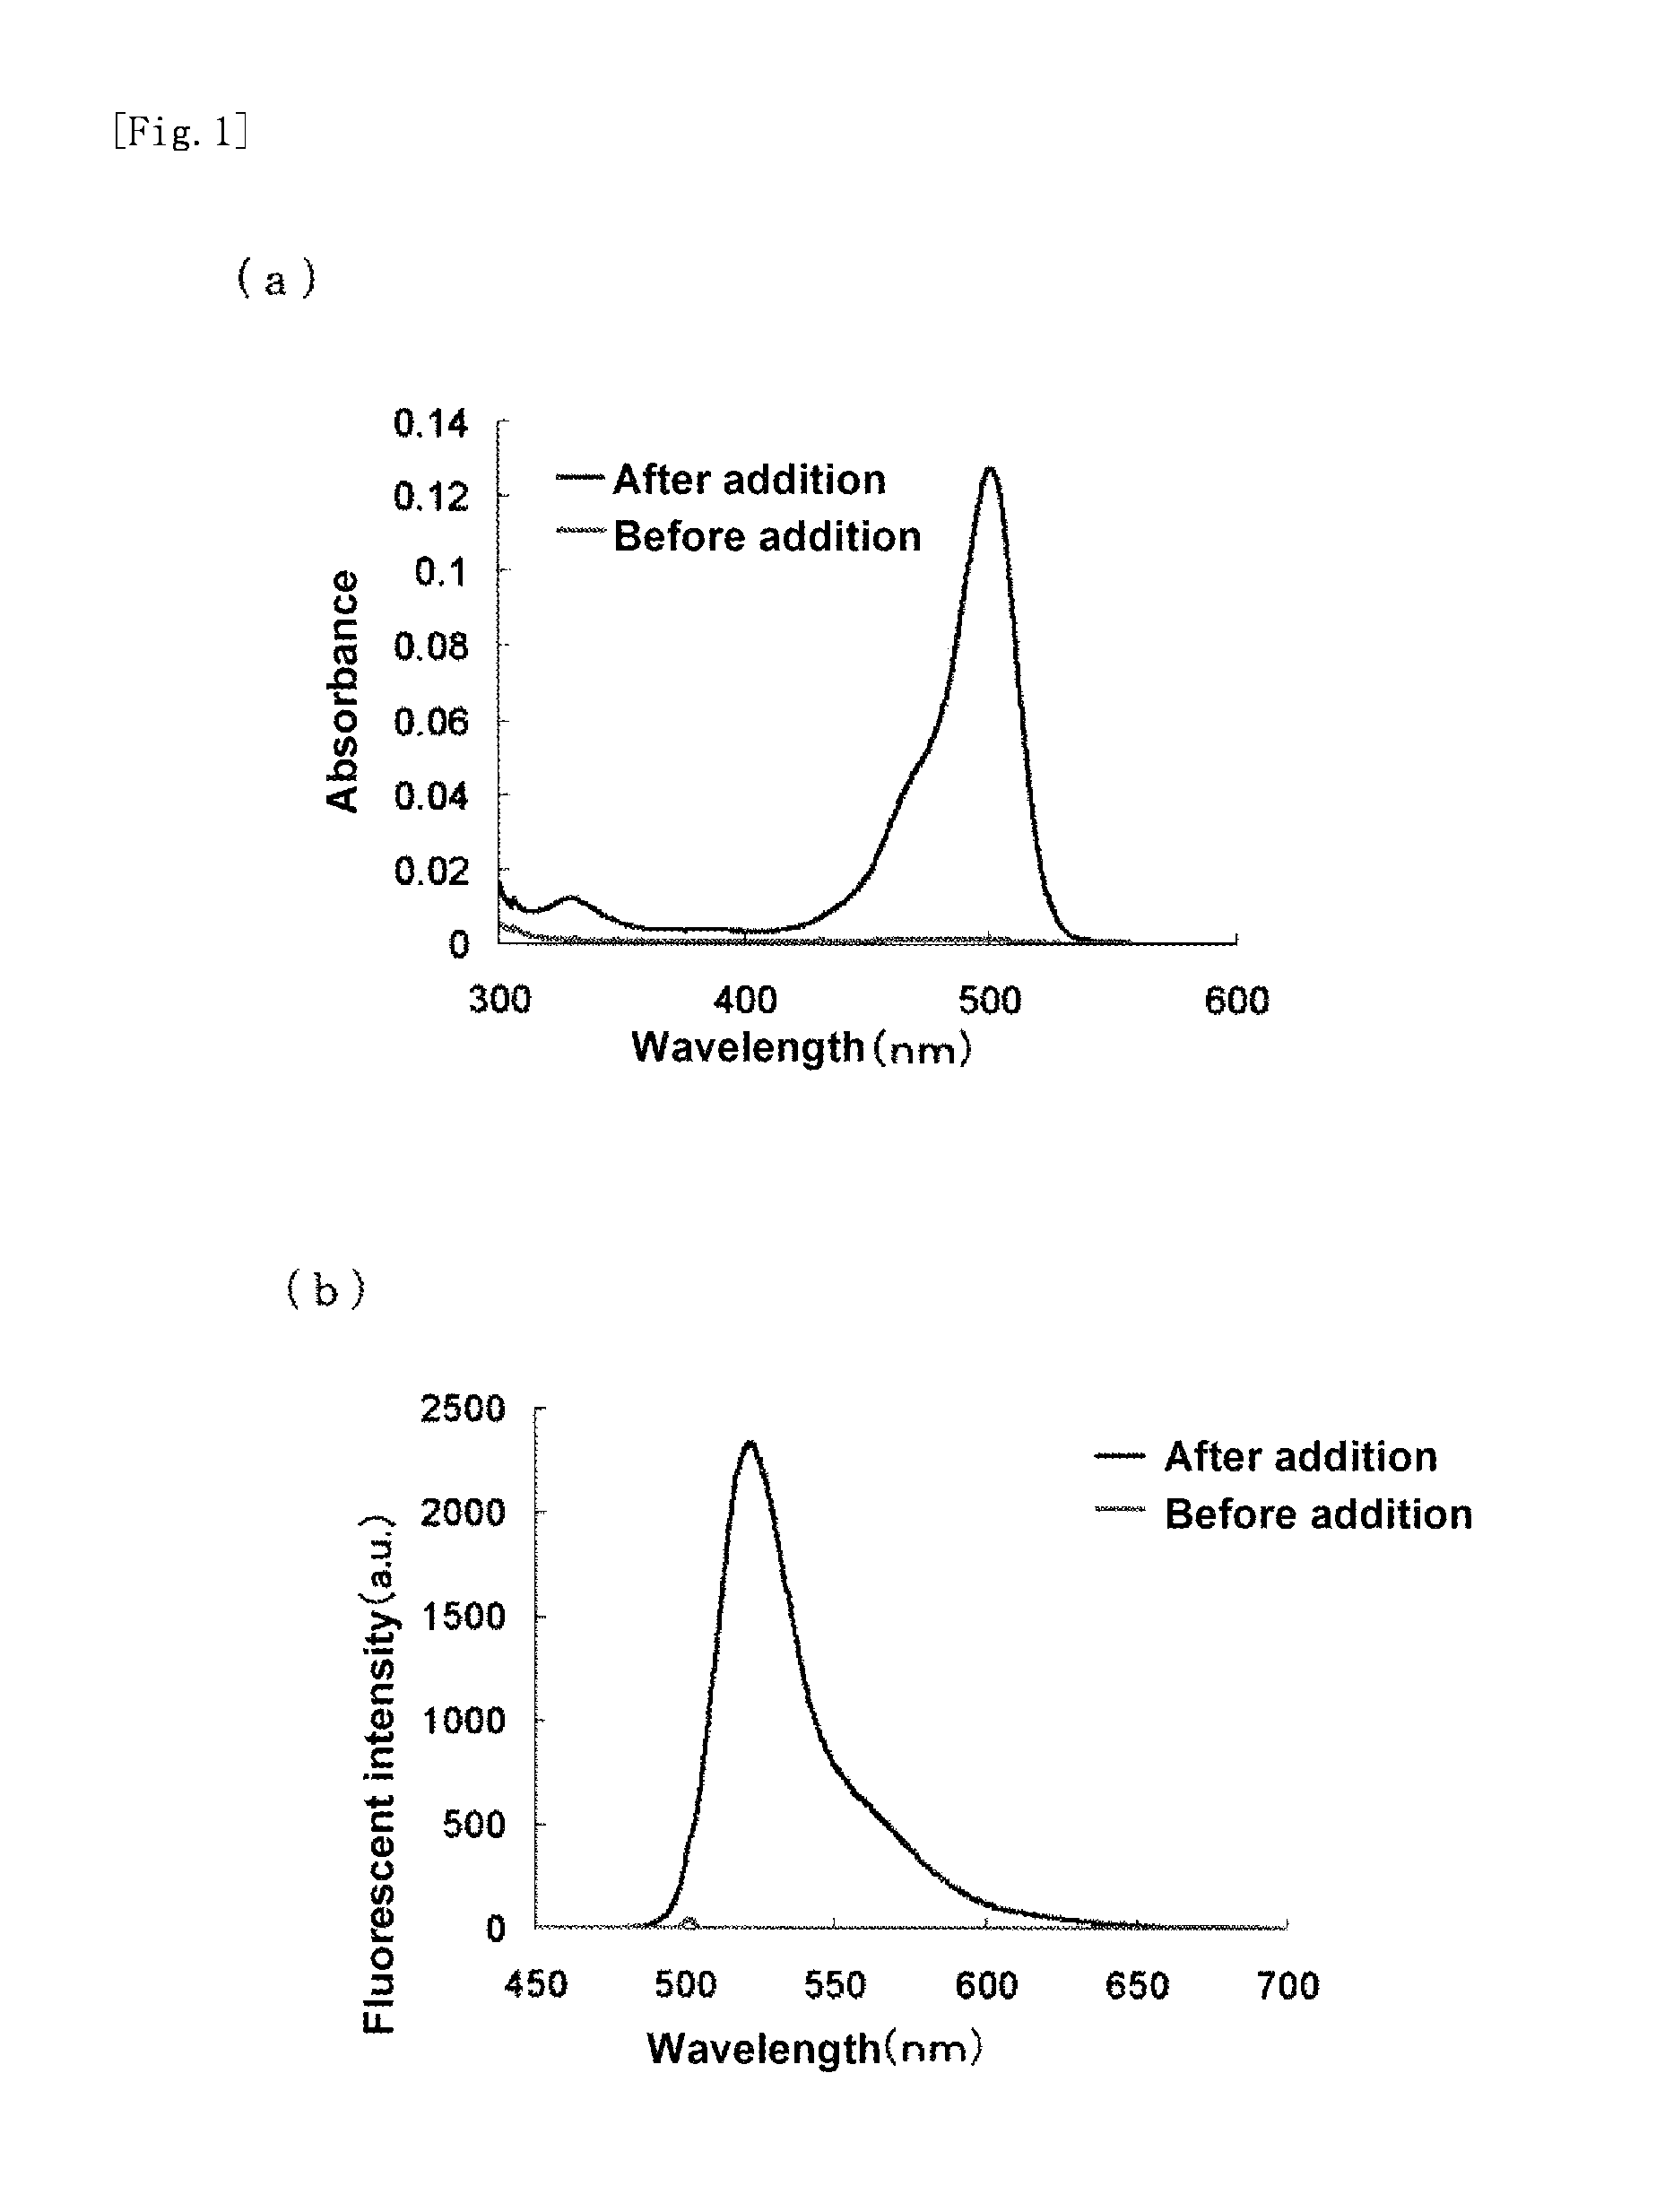 Fluorescent probe for high-sensitivity pancreatic fluid detection, and method for detecting pancreatic fluid